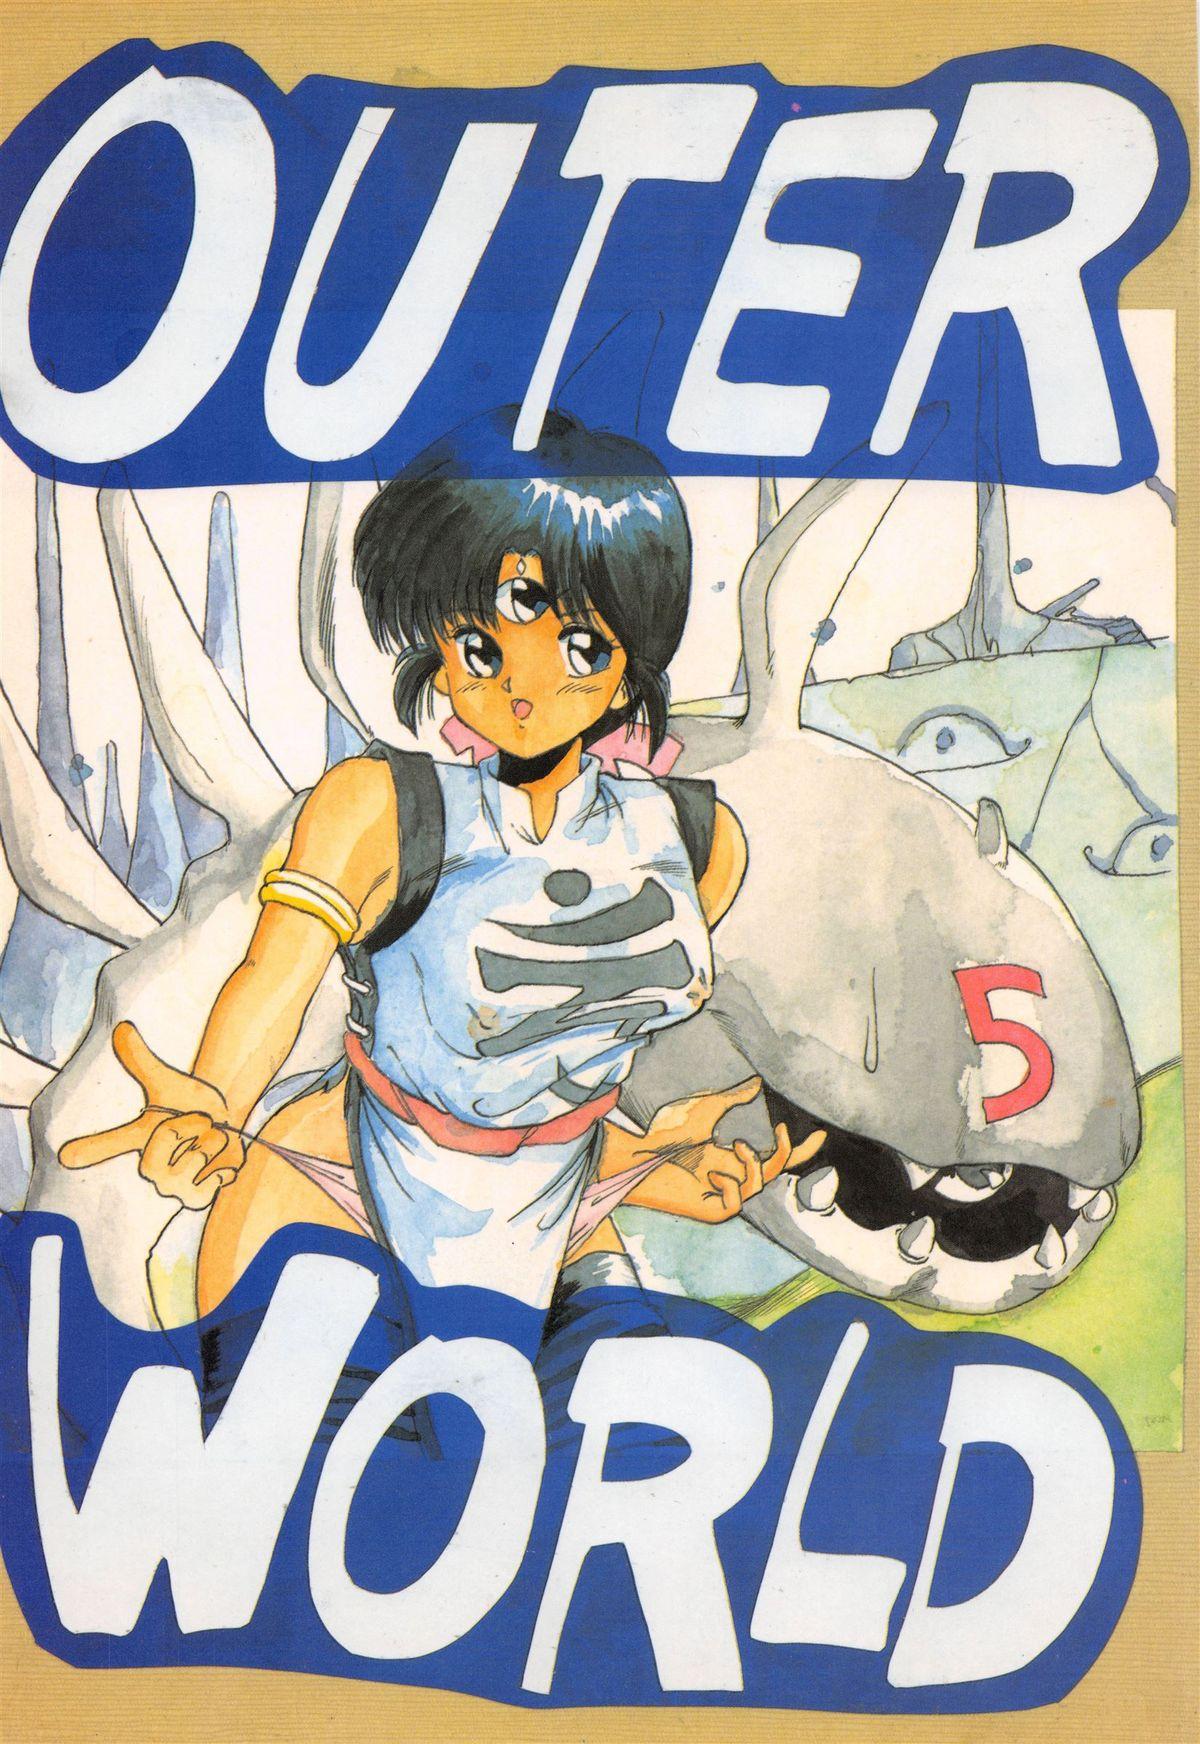 OUTER WORLD 0